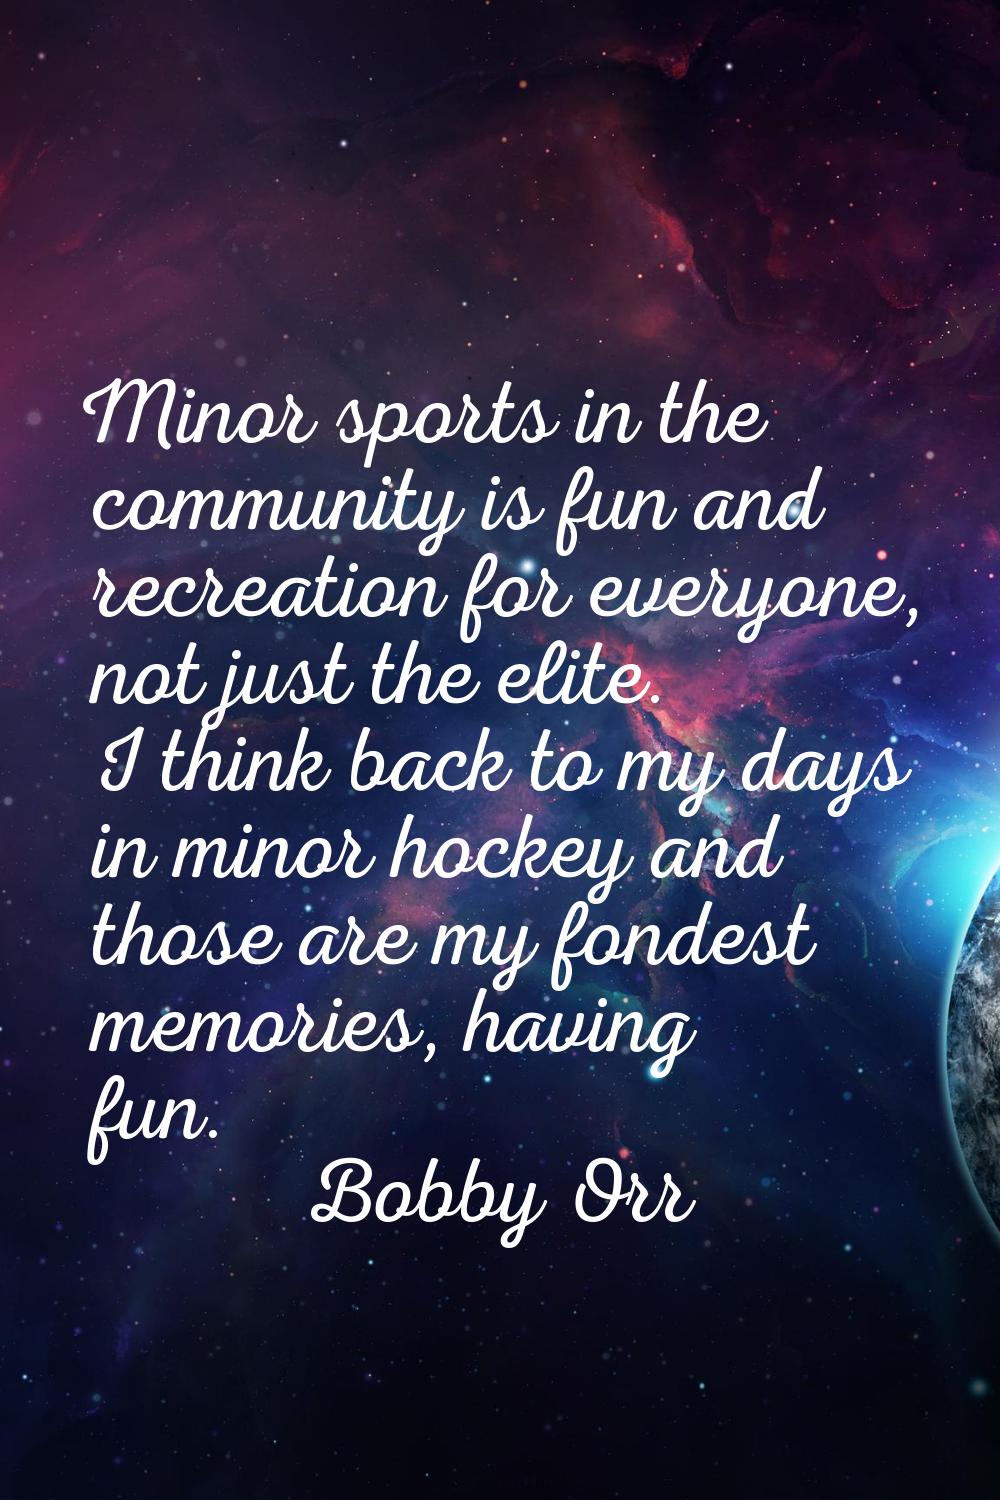 Minor sports in the community is fun and recreation for everyone, not just the elite. I think back 